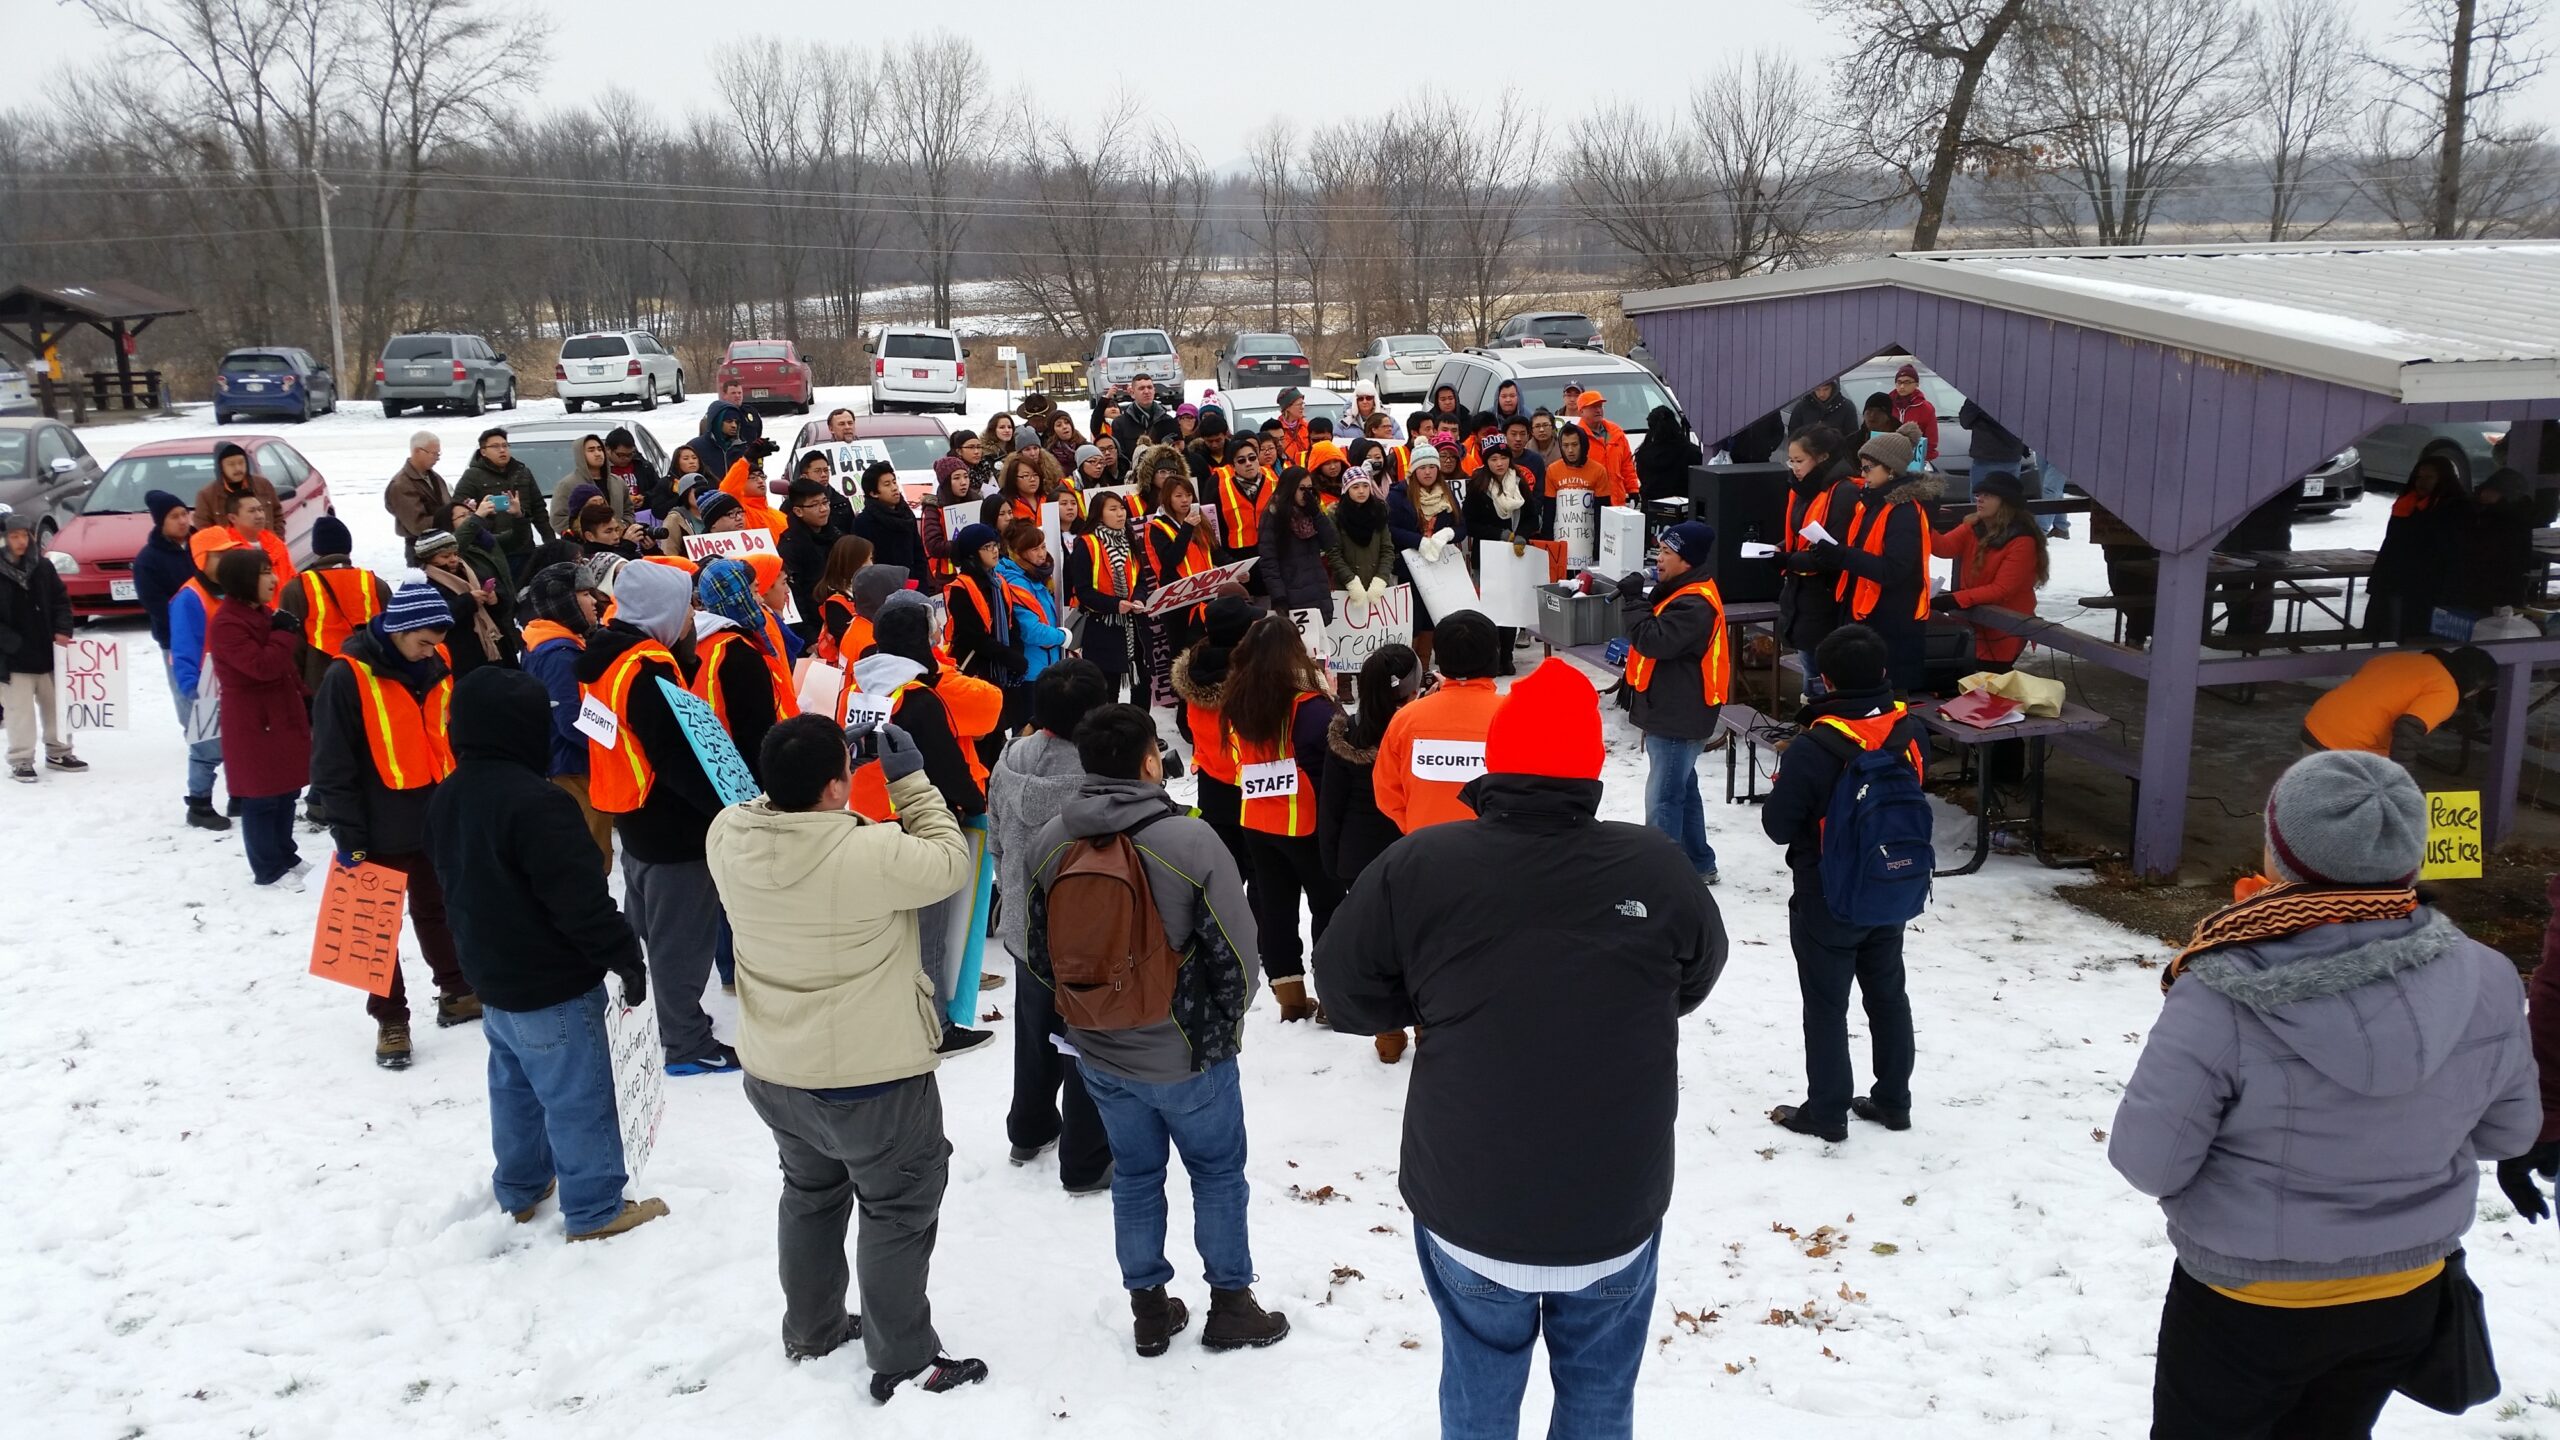 Students March In Western Wisconsin To Decry Attack On Hmong Hunter